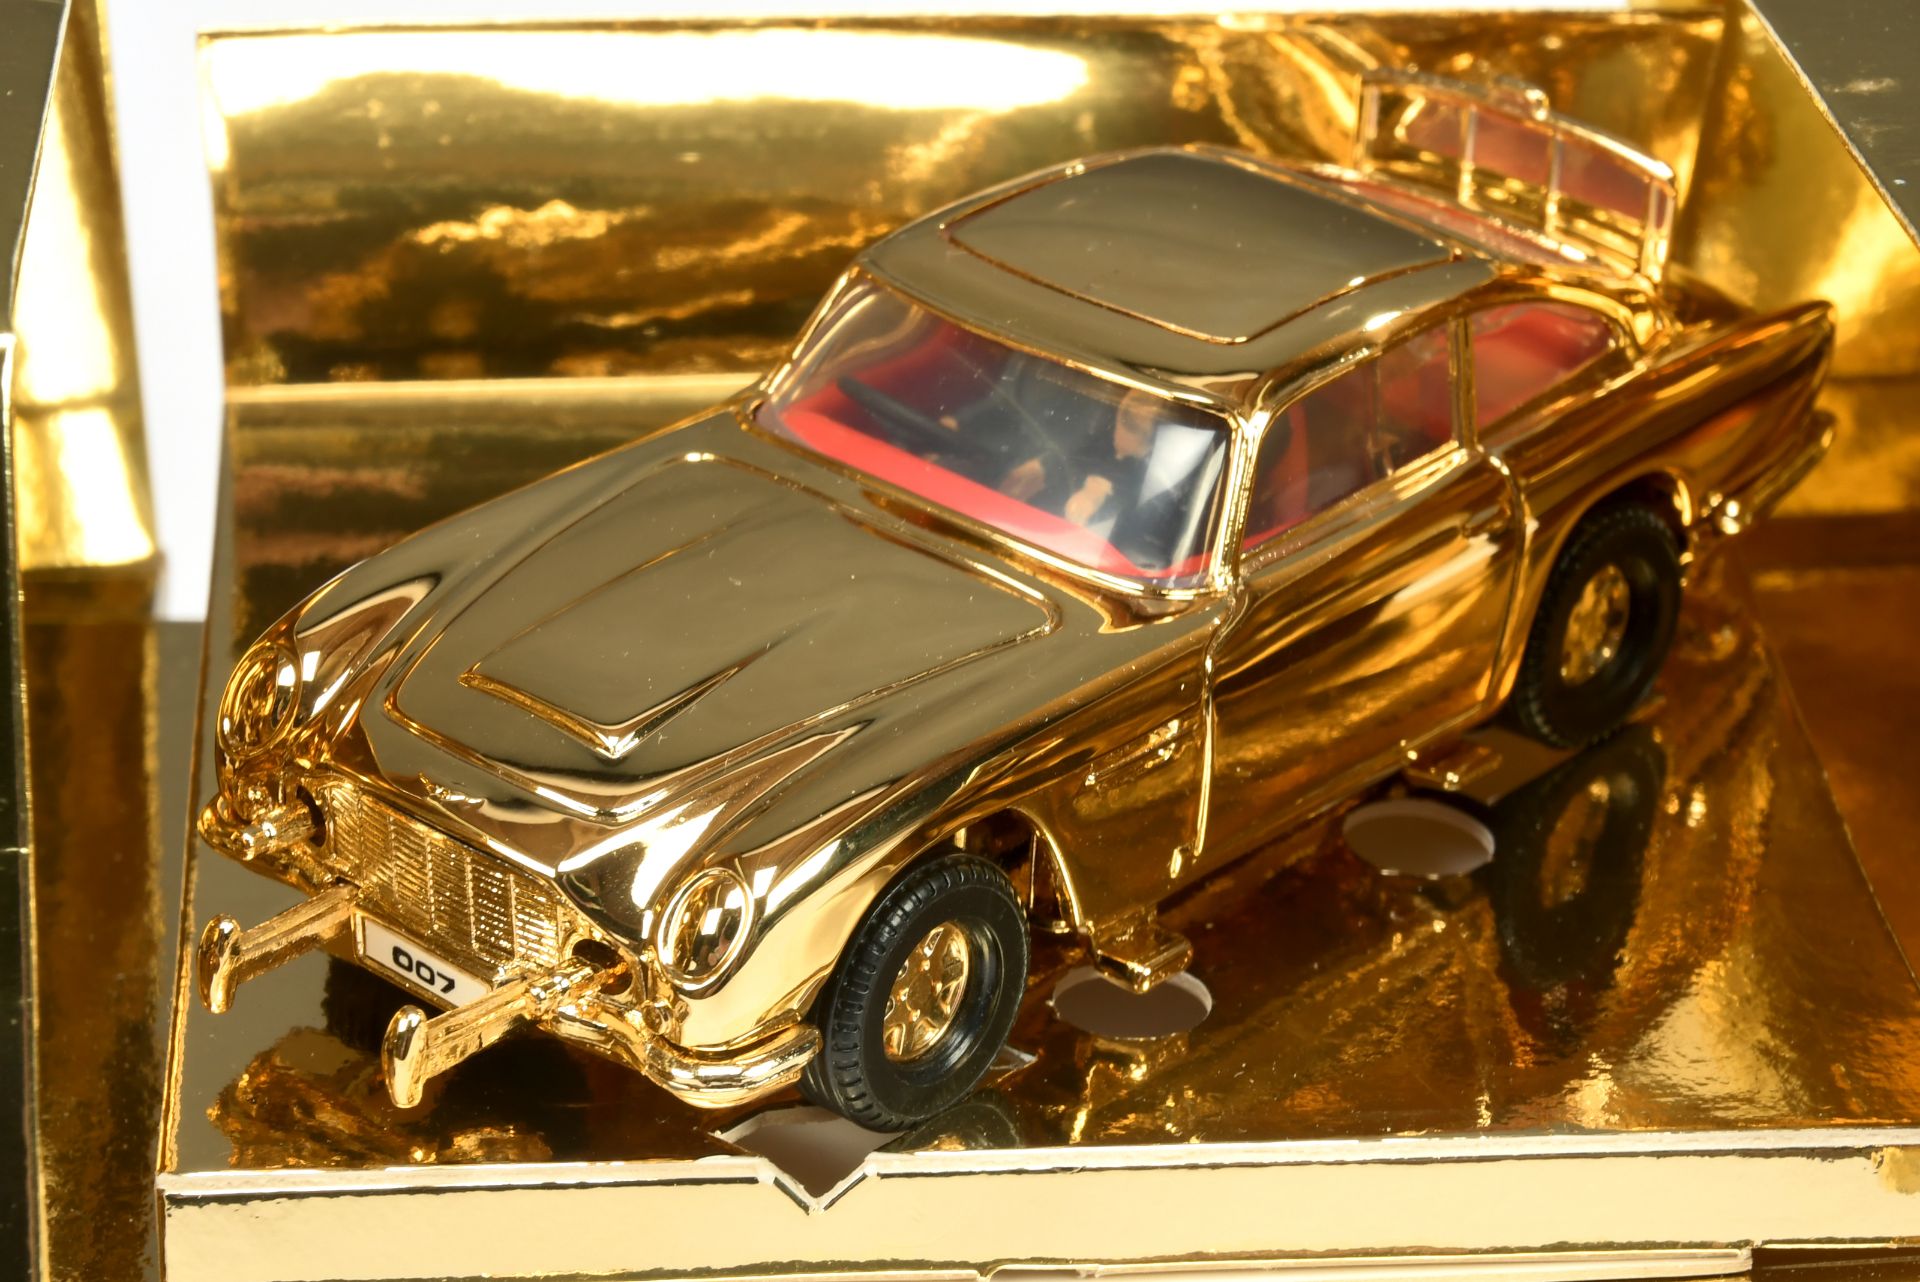 Corgi Toys "James Bond" Aston martin (1/36th scale) - Gold Plated issue with red interior and "Ja... - Image 7 of 8